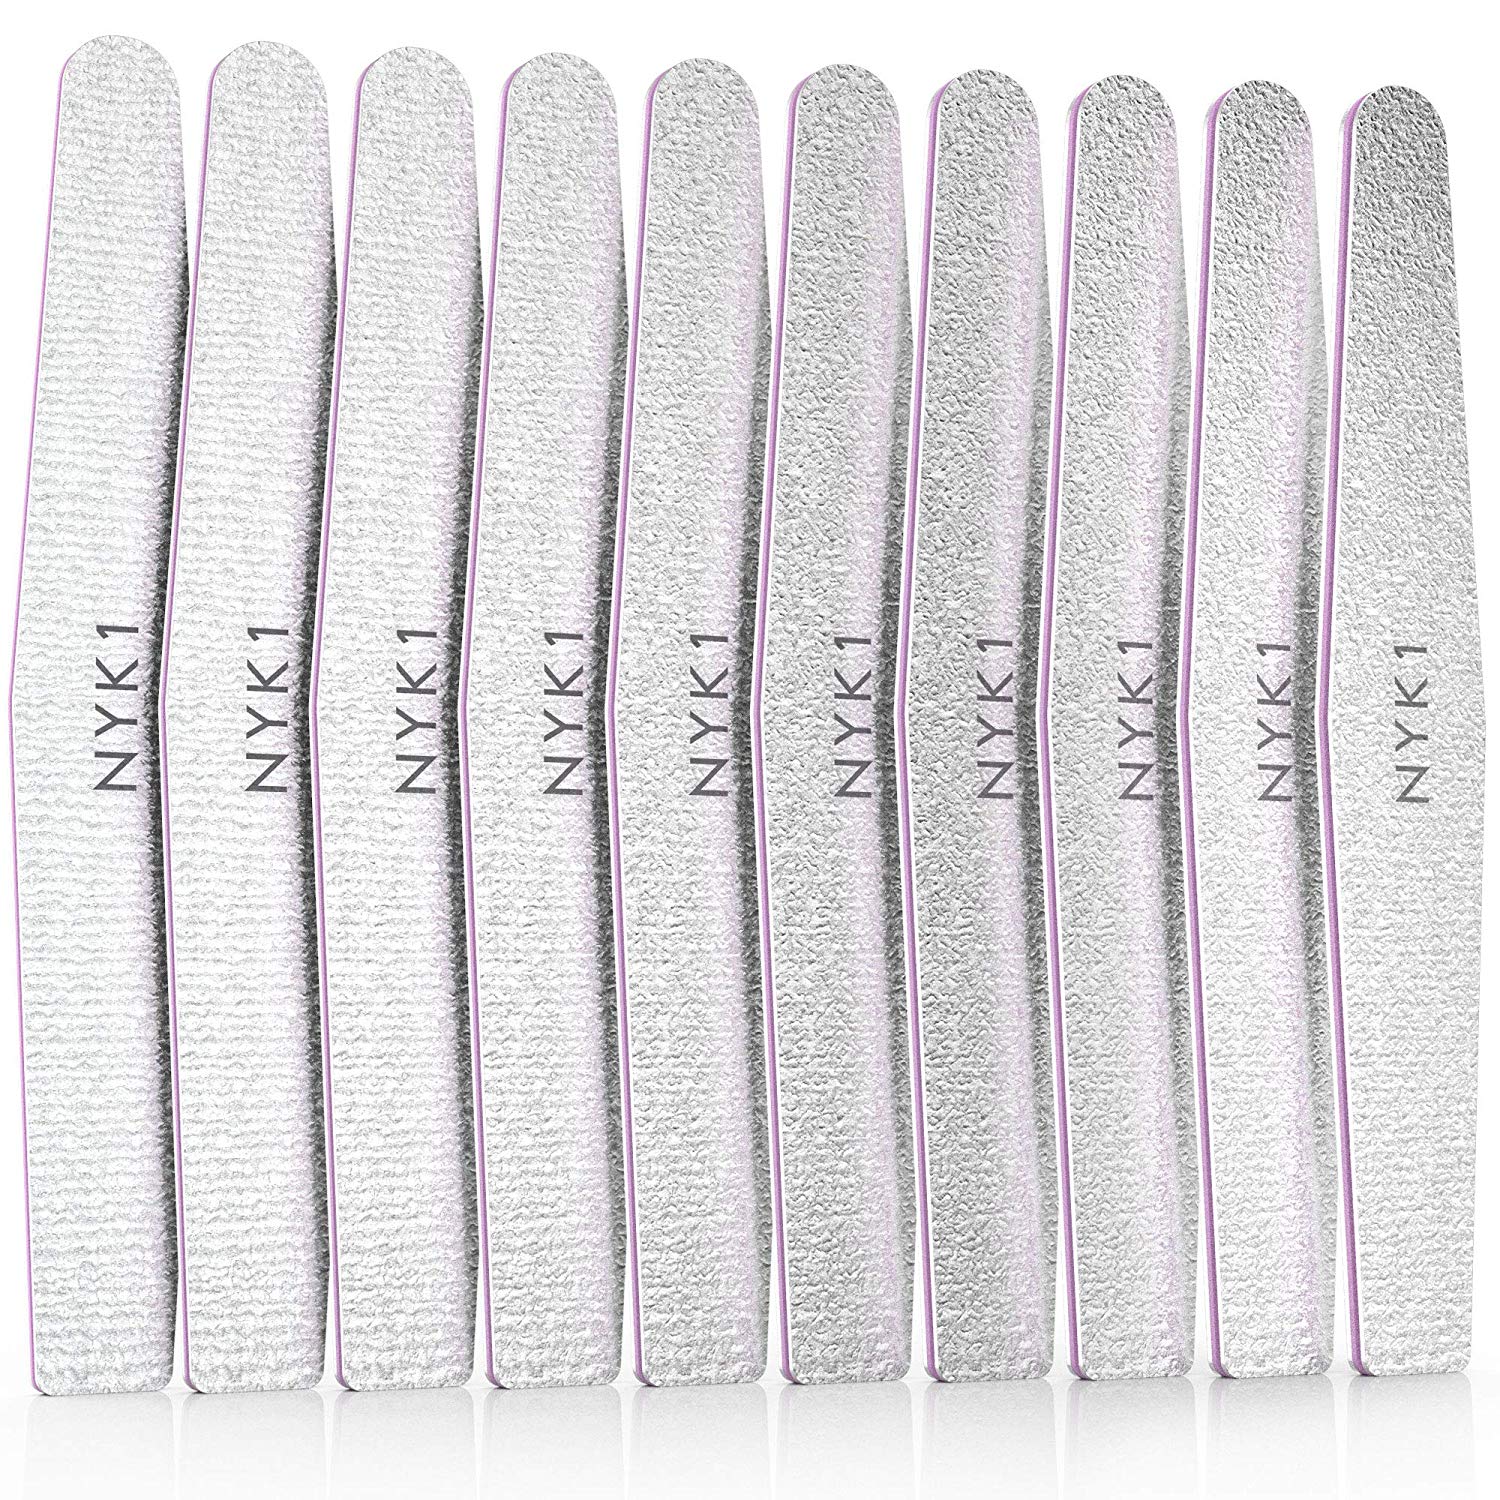 NYK1 Professional Emery Board Nail Files (10 Pack)